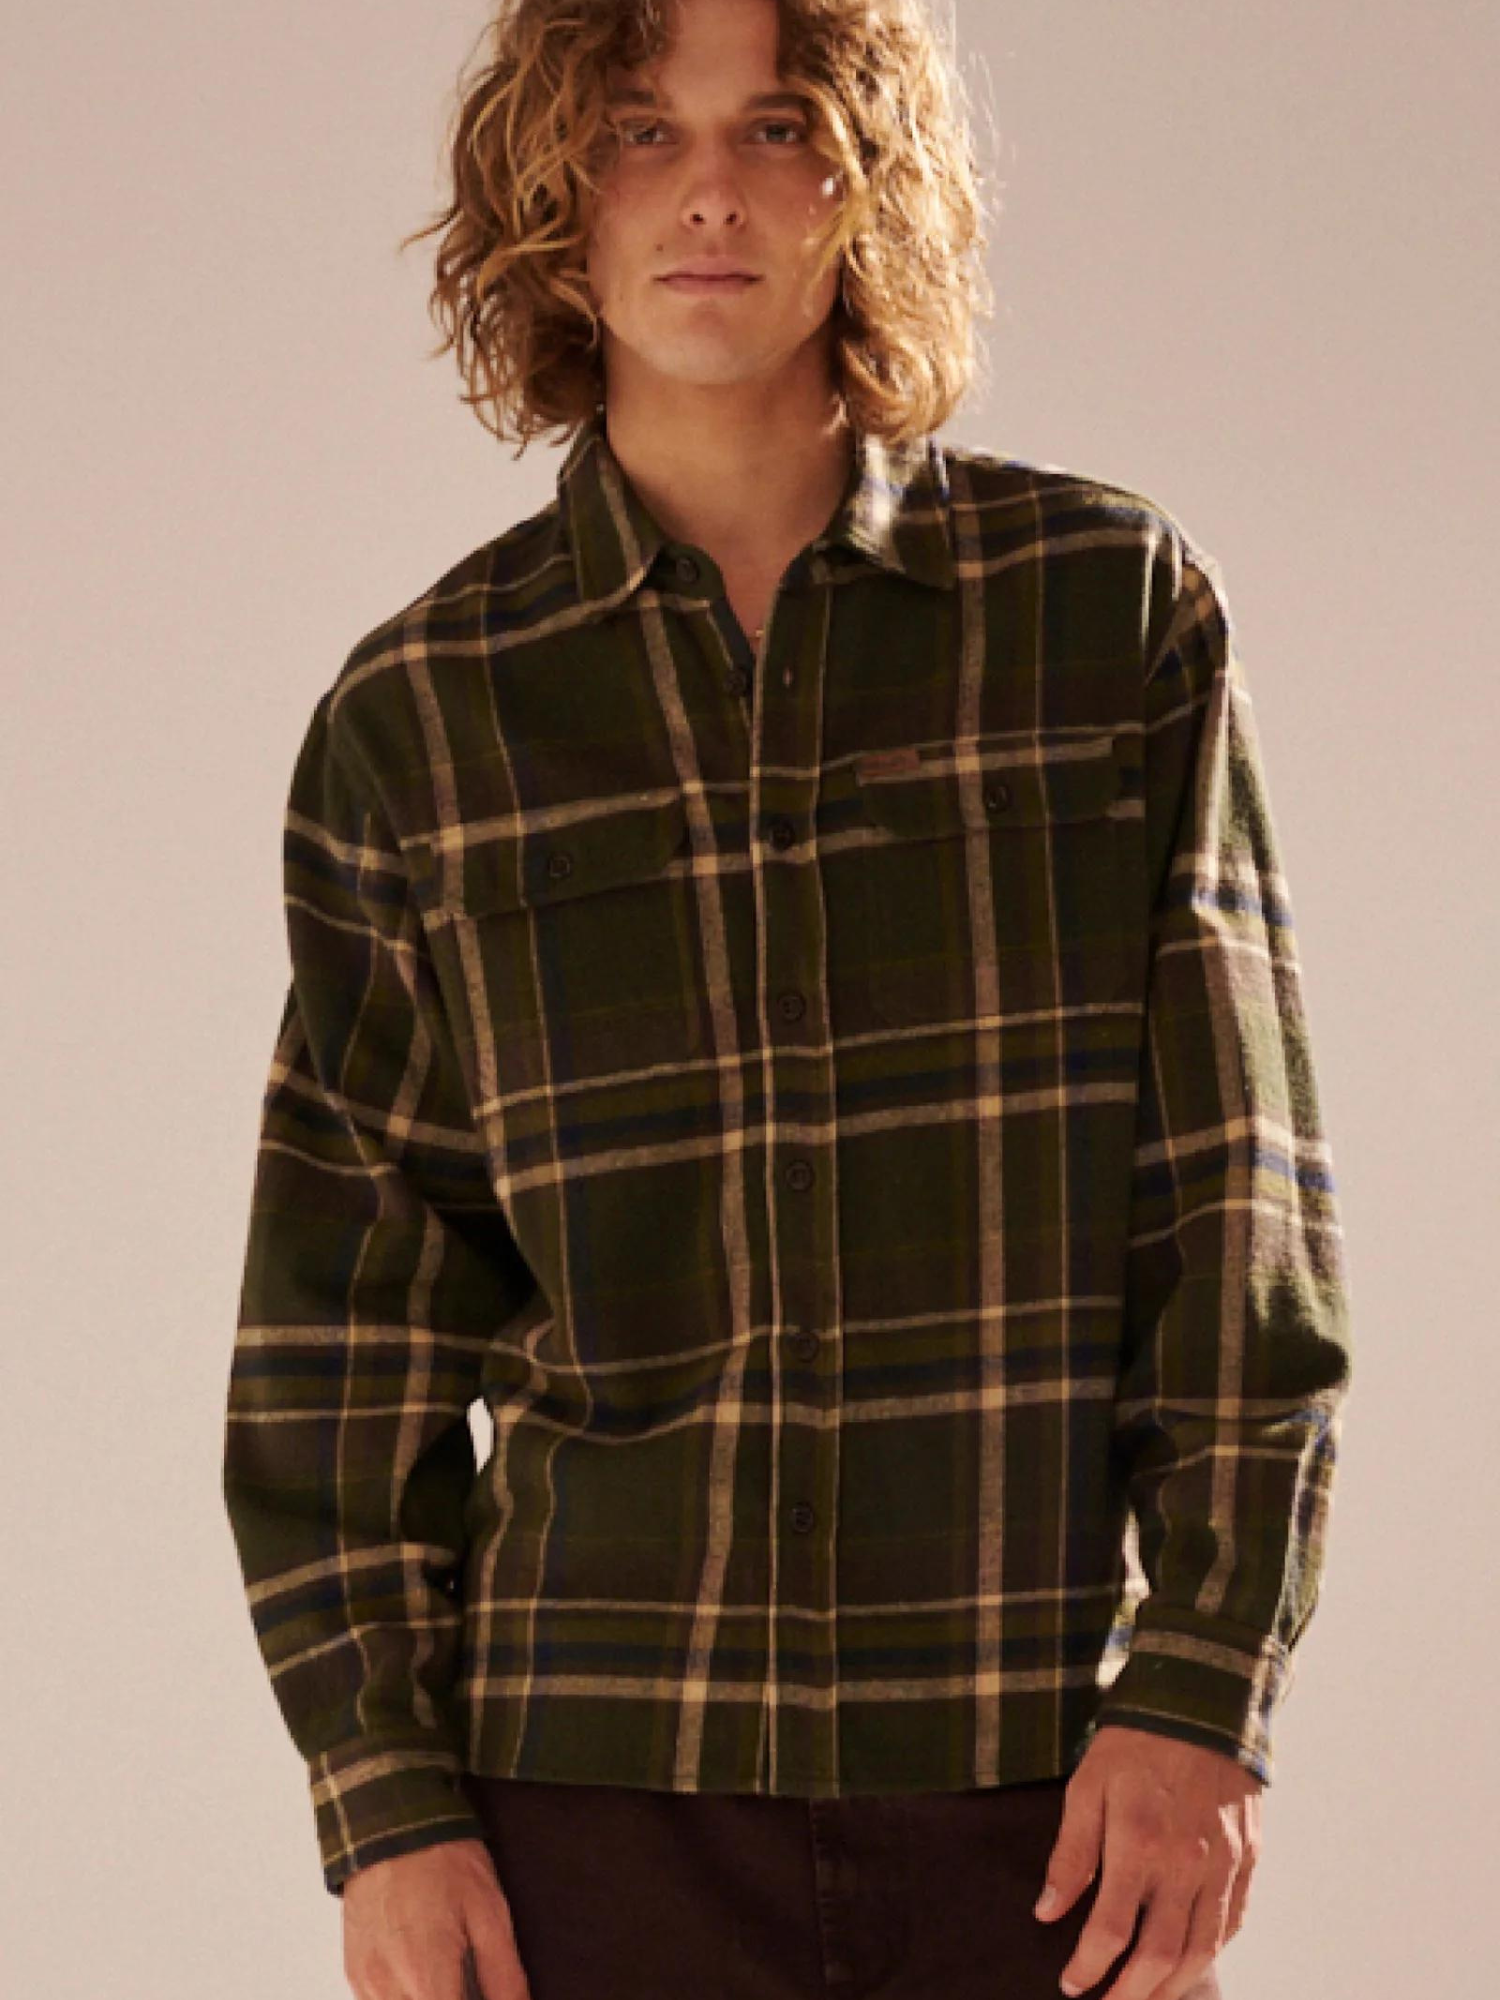 Rollas Trailer Check Shirt ~ Faded Army